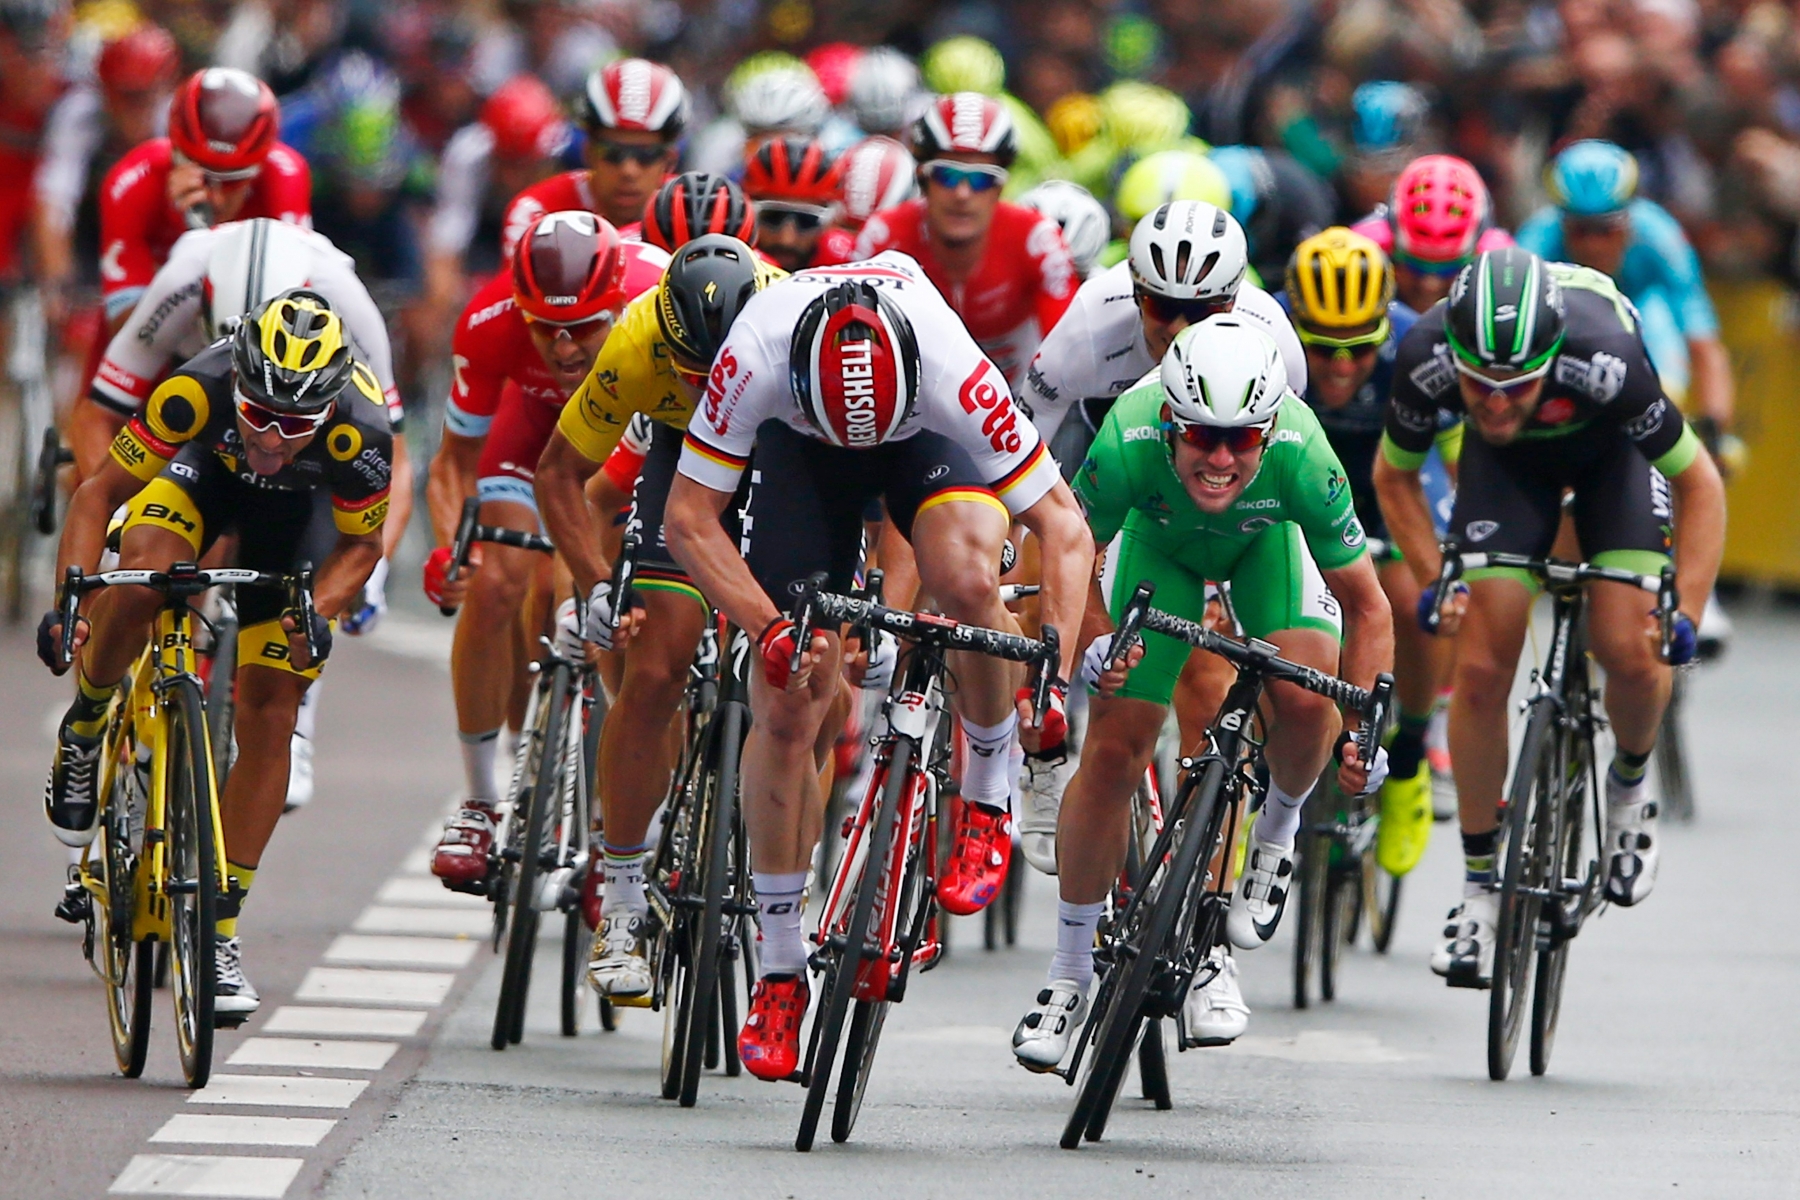 Britain's Mark Cavendish, wearing the best sprinter's green jersey, sprints with Germany's Andre Greipel, center in white, to win the third stage of the Tour de France cycling race over 223.5 kilometers (138.6 miles) with start in Granville and finish in Angers, France, Monday, July 4, 2016. (AP Photo/Peter Dejong) France Cycling Tour de France